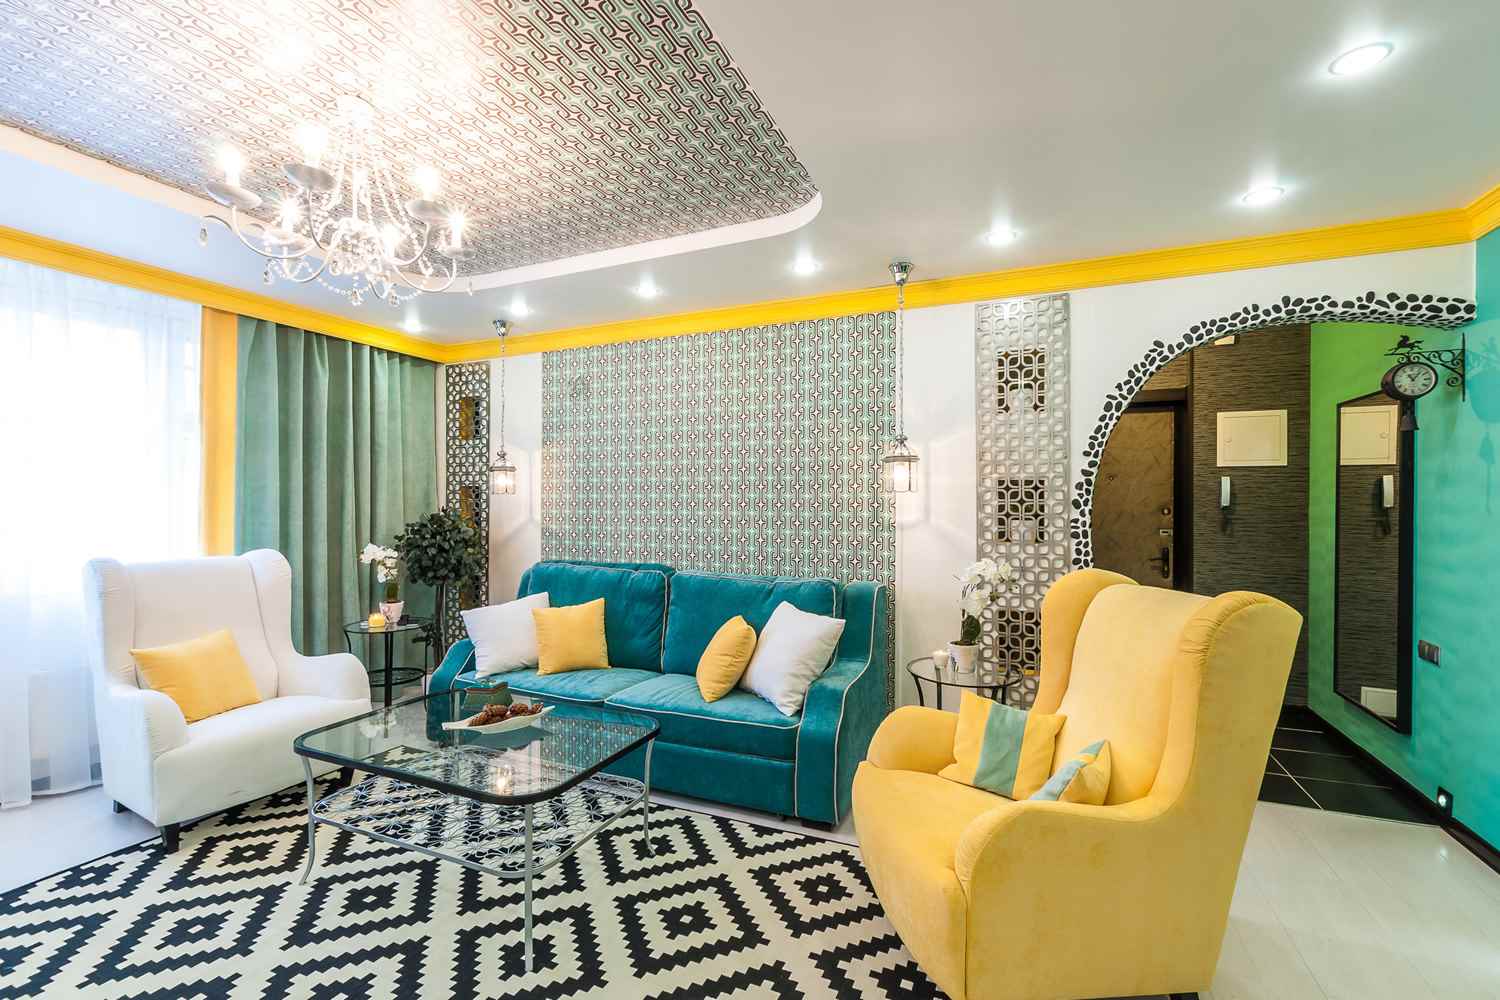 the option of using beautiful yellow in the decor of the room